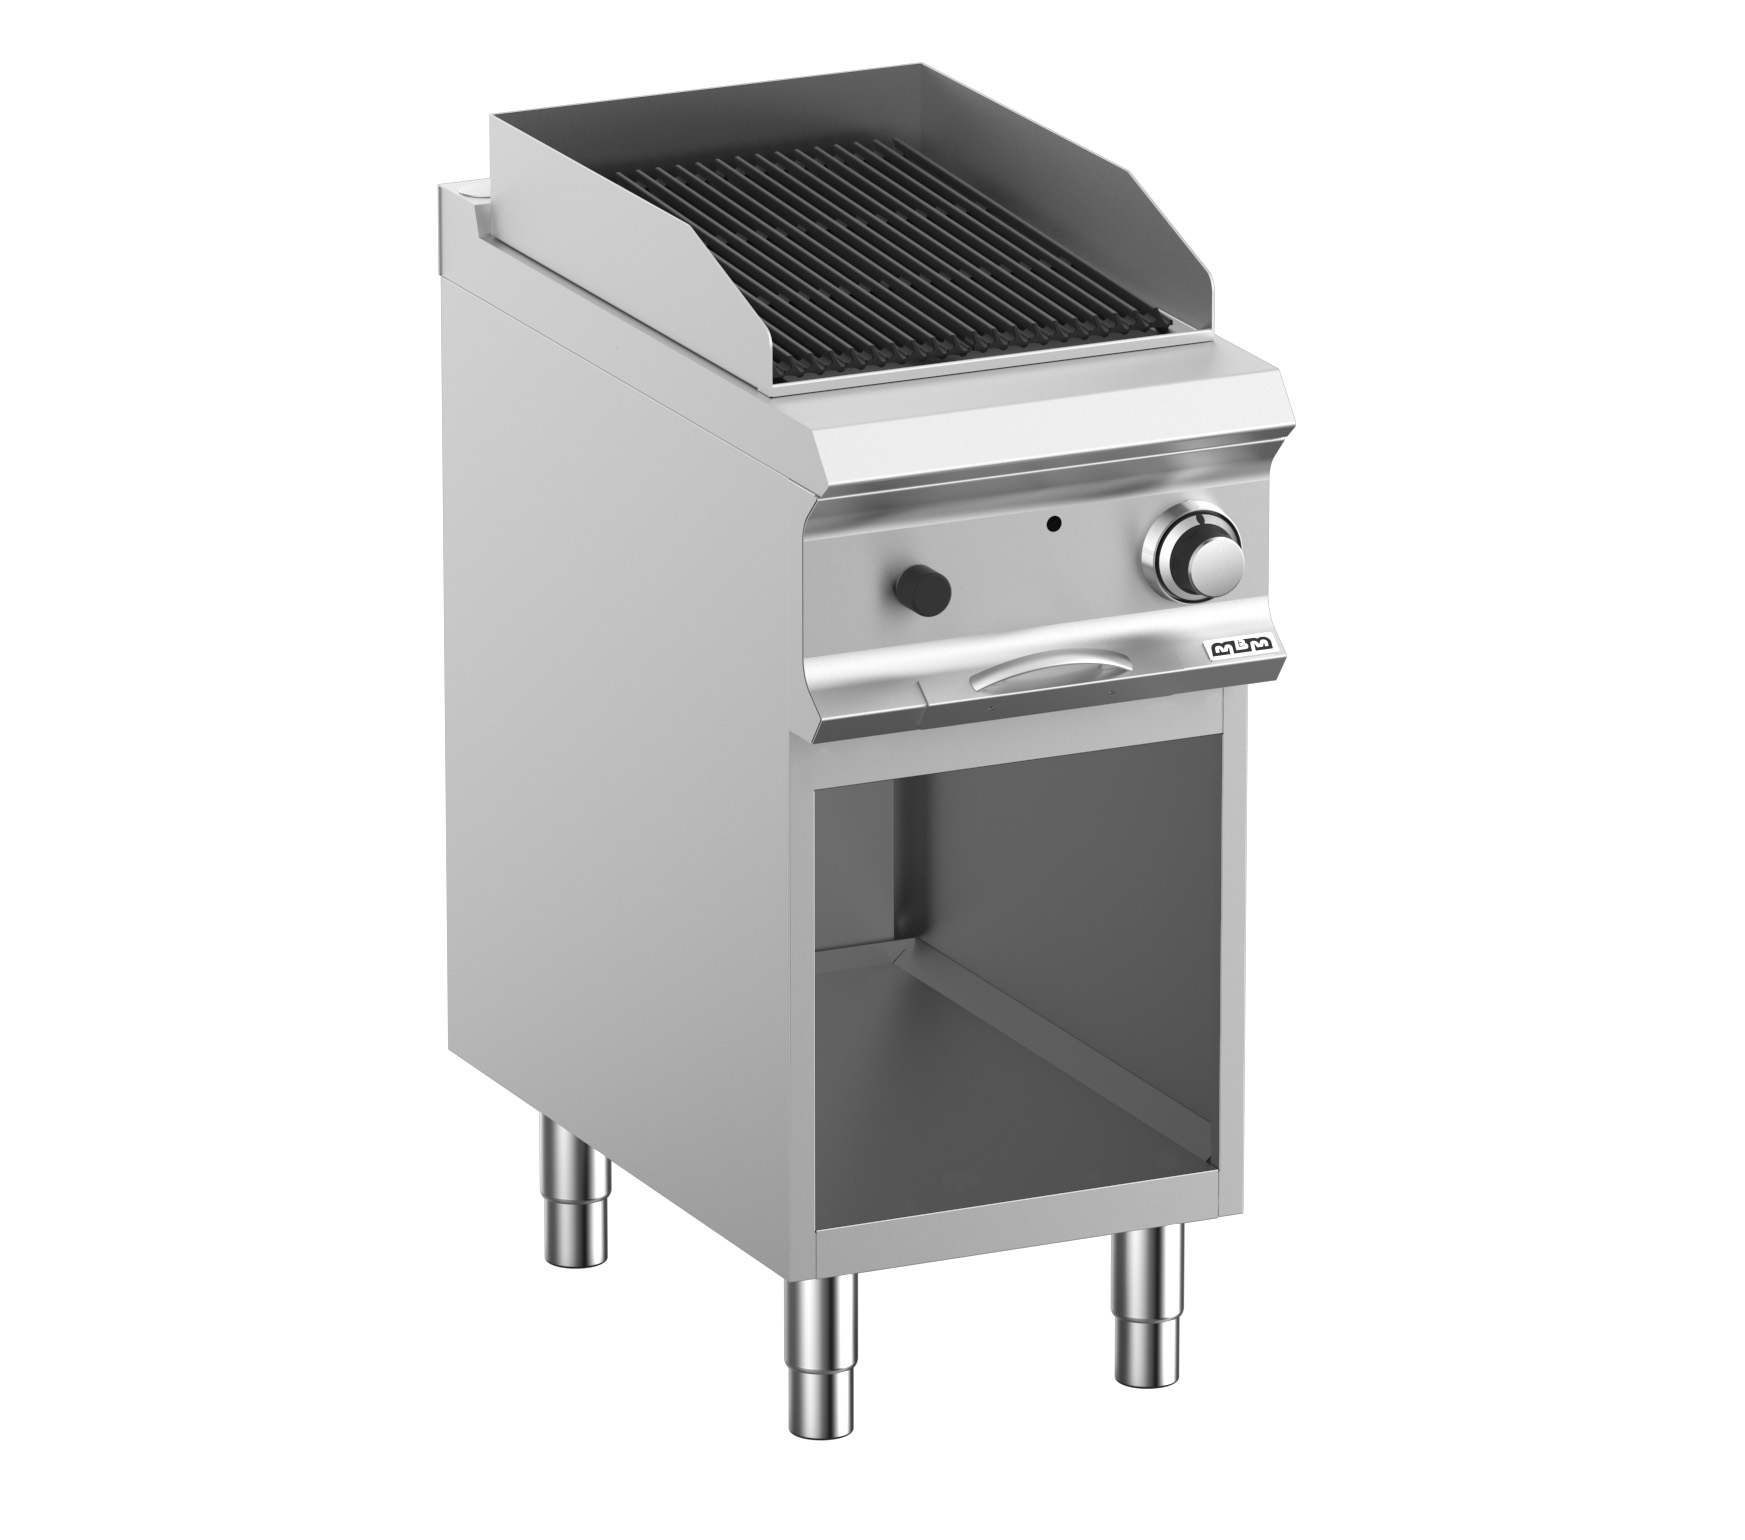 Domina Pro 700 PLG74A Charcoal Grill Freestanding